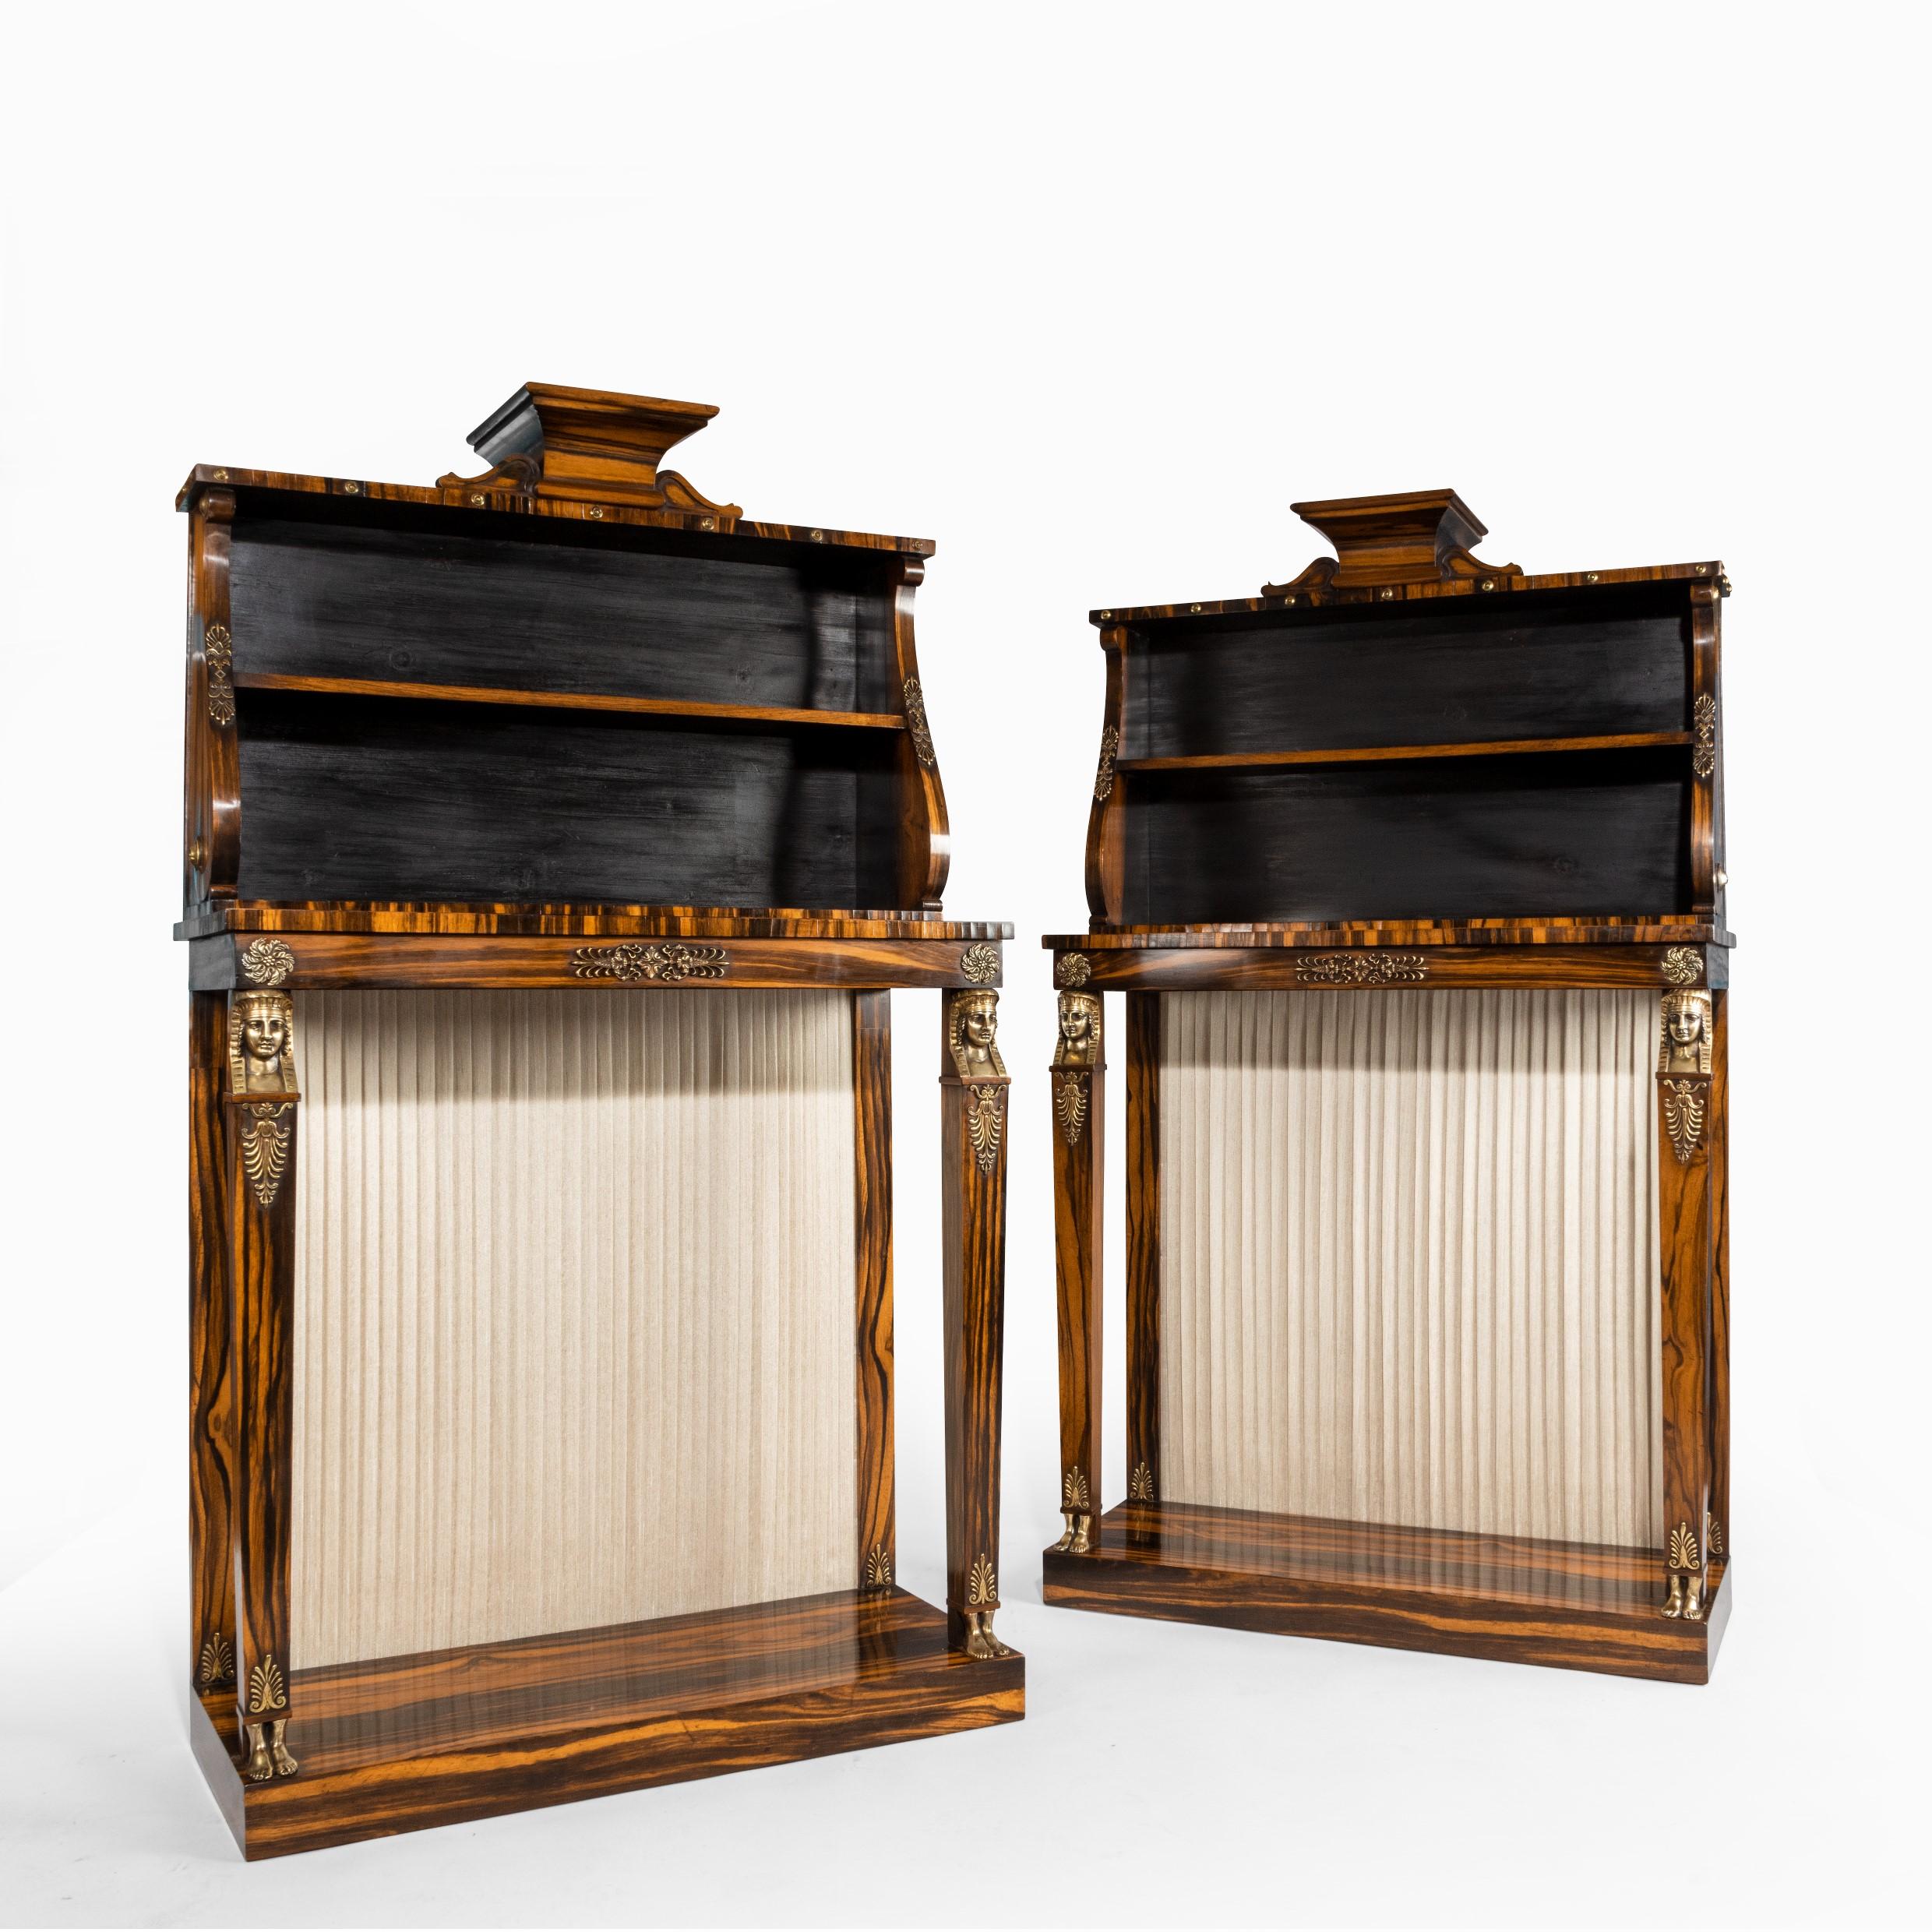 A pair of high Regency Coromandel and ormolu bookcase console tables in the style of Thomas Hope, each of rectangular form with two square section pillars in the form of pharaonic terms with bare feet, on a solid plinth, surmounted by two shelves